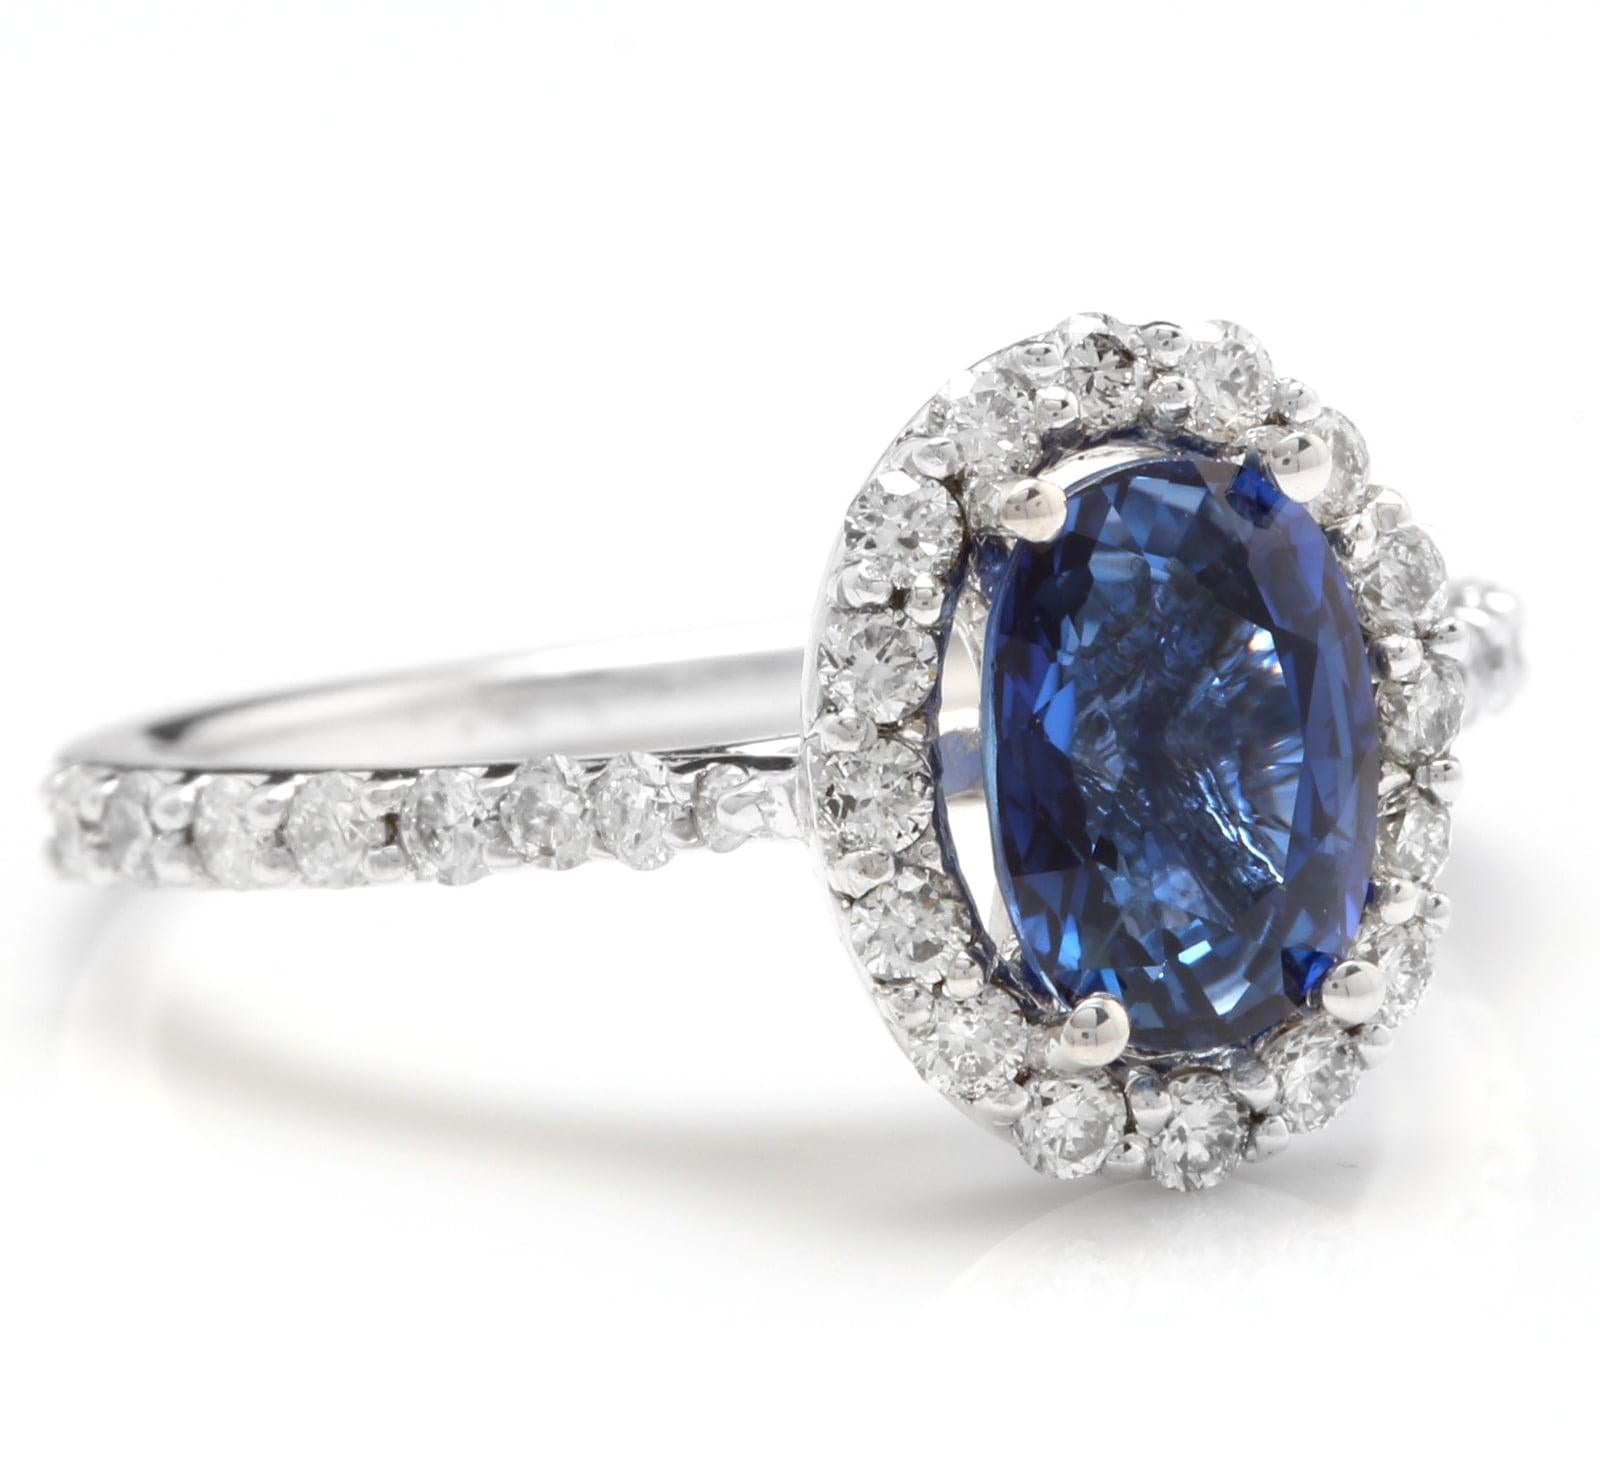 2.90 Carats Exquisite Natural Blue Sapphire and Diamond 14K Solid White Gold Ring

Total Natural Blue Sapphire Weight is: Approx. 2.20 Carats

Sapphire Measures: Approx. 8.00 x 6.00mm

Natural Round Diamonds Weight: Approx. 0.70 Carats (color G-H /